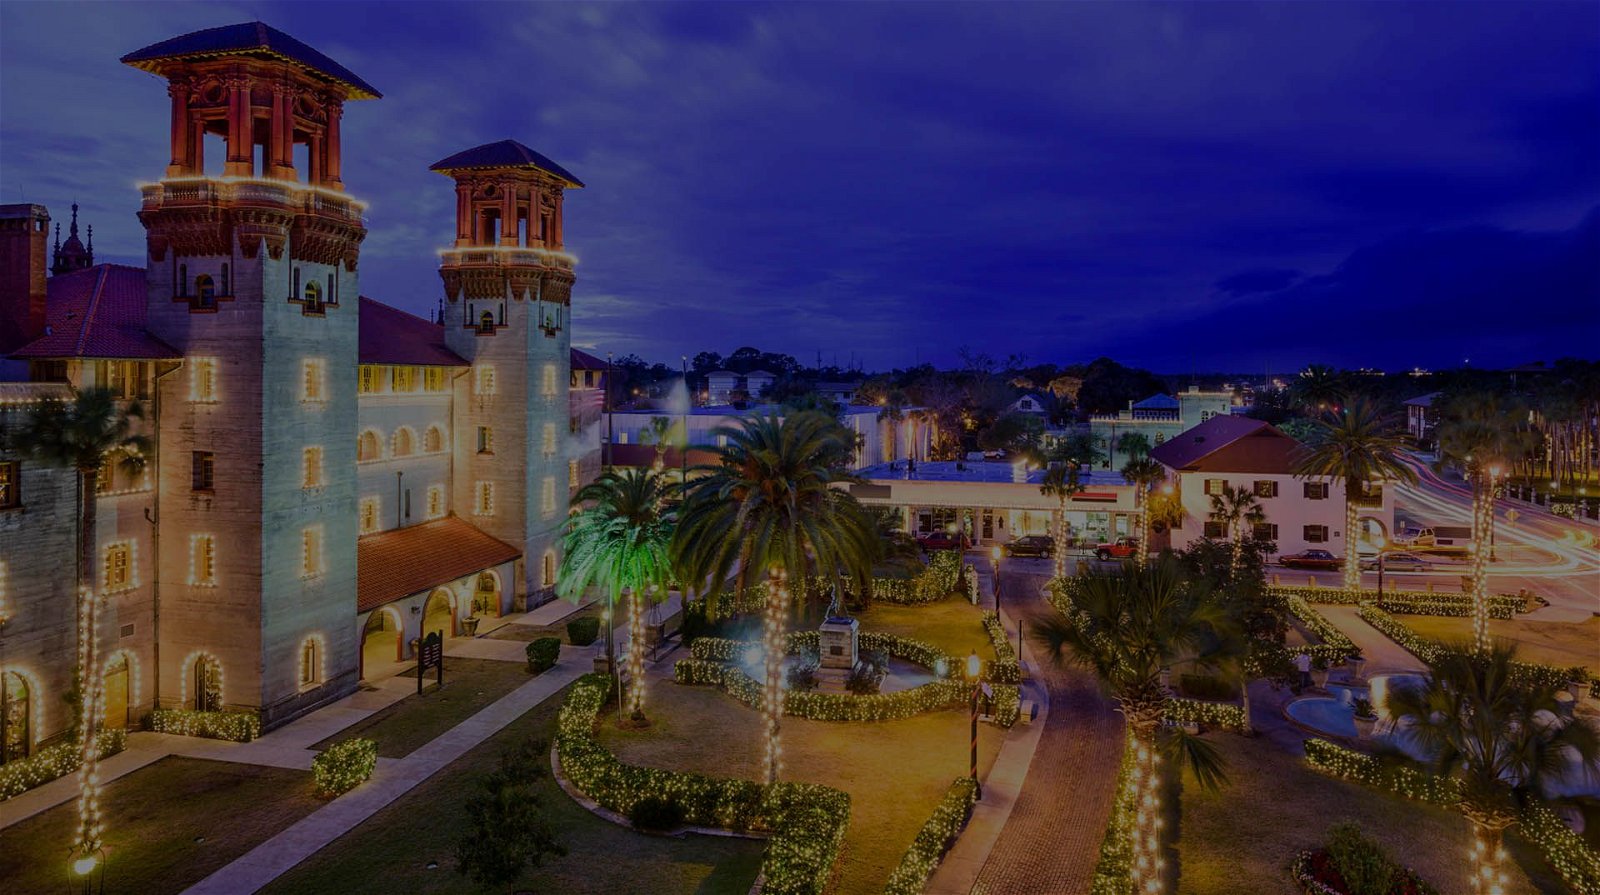 st. augustine mortgage rates, st. augustine mortgage brokers, st. augustine florida mortgage, mortgages st. augustine fl, st. augustine mortgage calculator, st. augustine condo financing, st. augustine condo mortgages, st. augustine condotel financing, st. augustine condo mortgage rates, st. augustine condotel mortgage rates